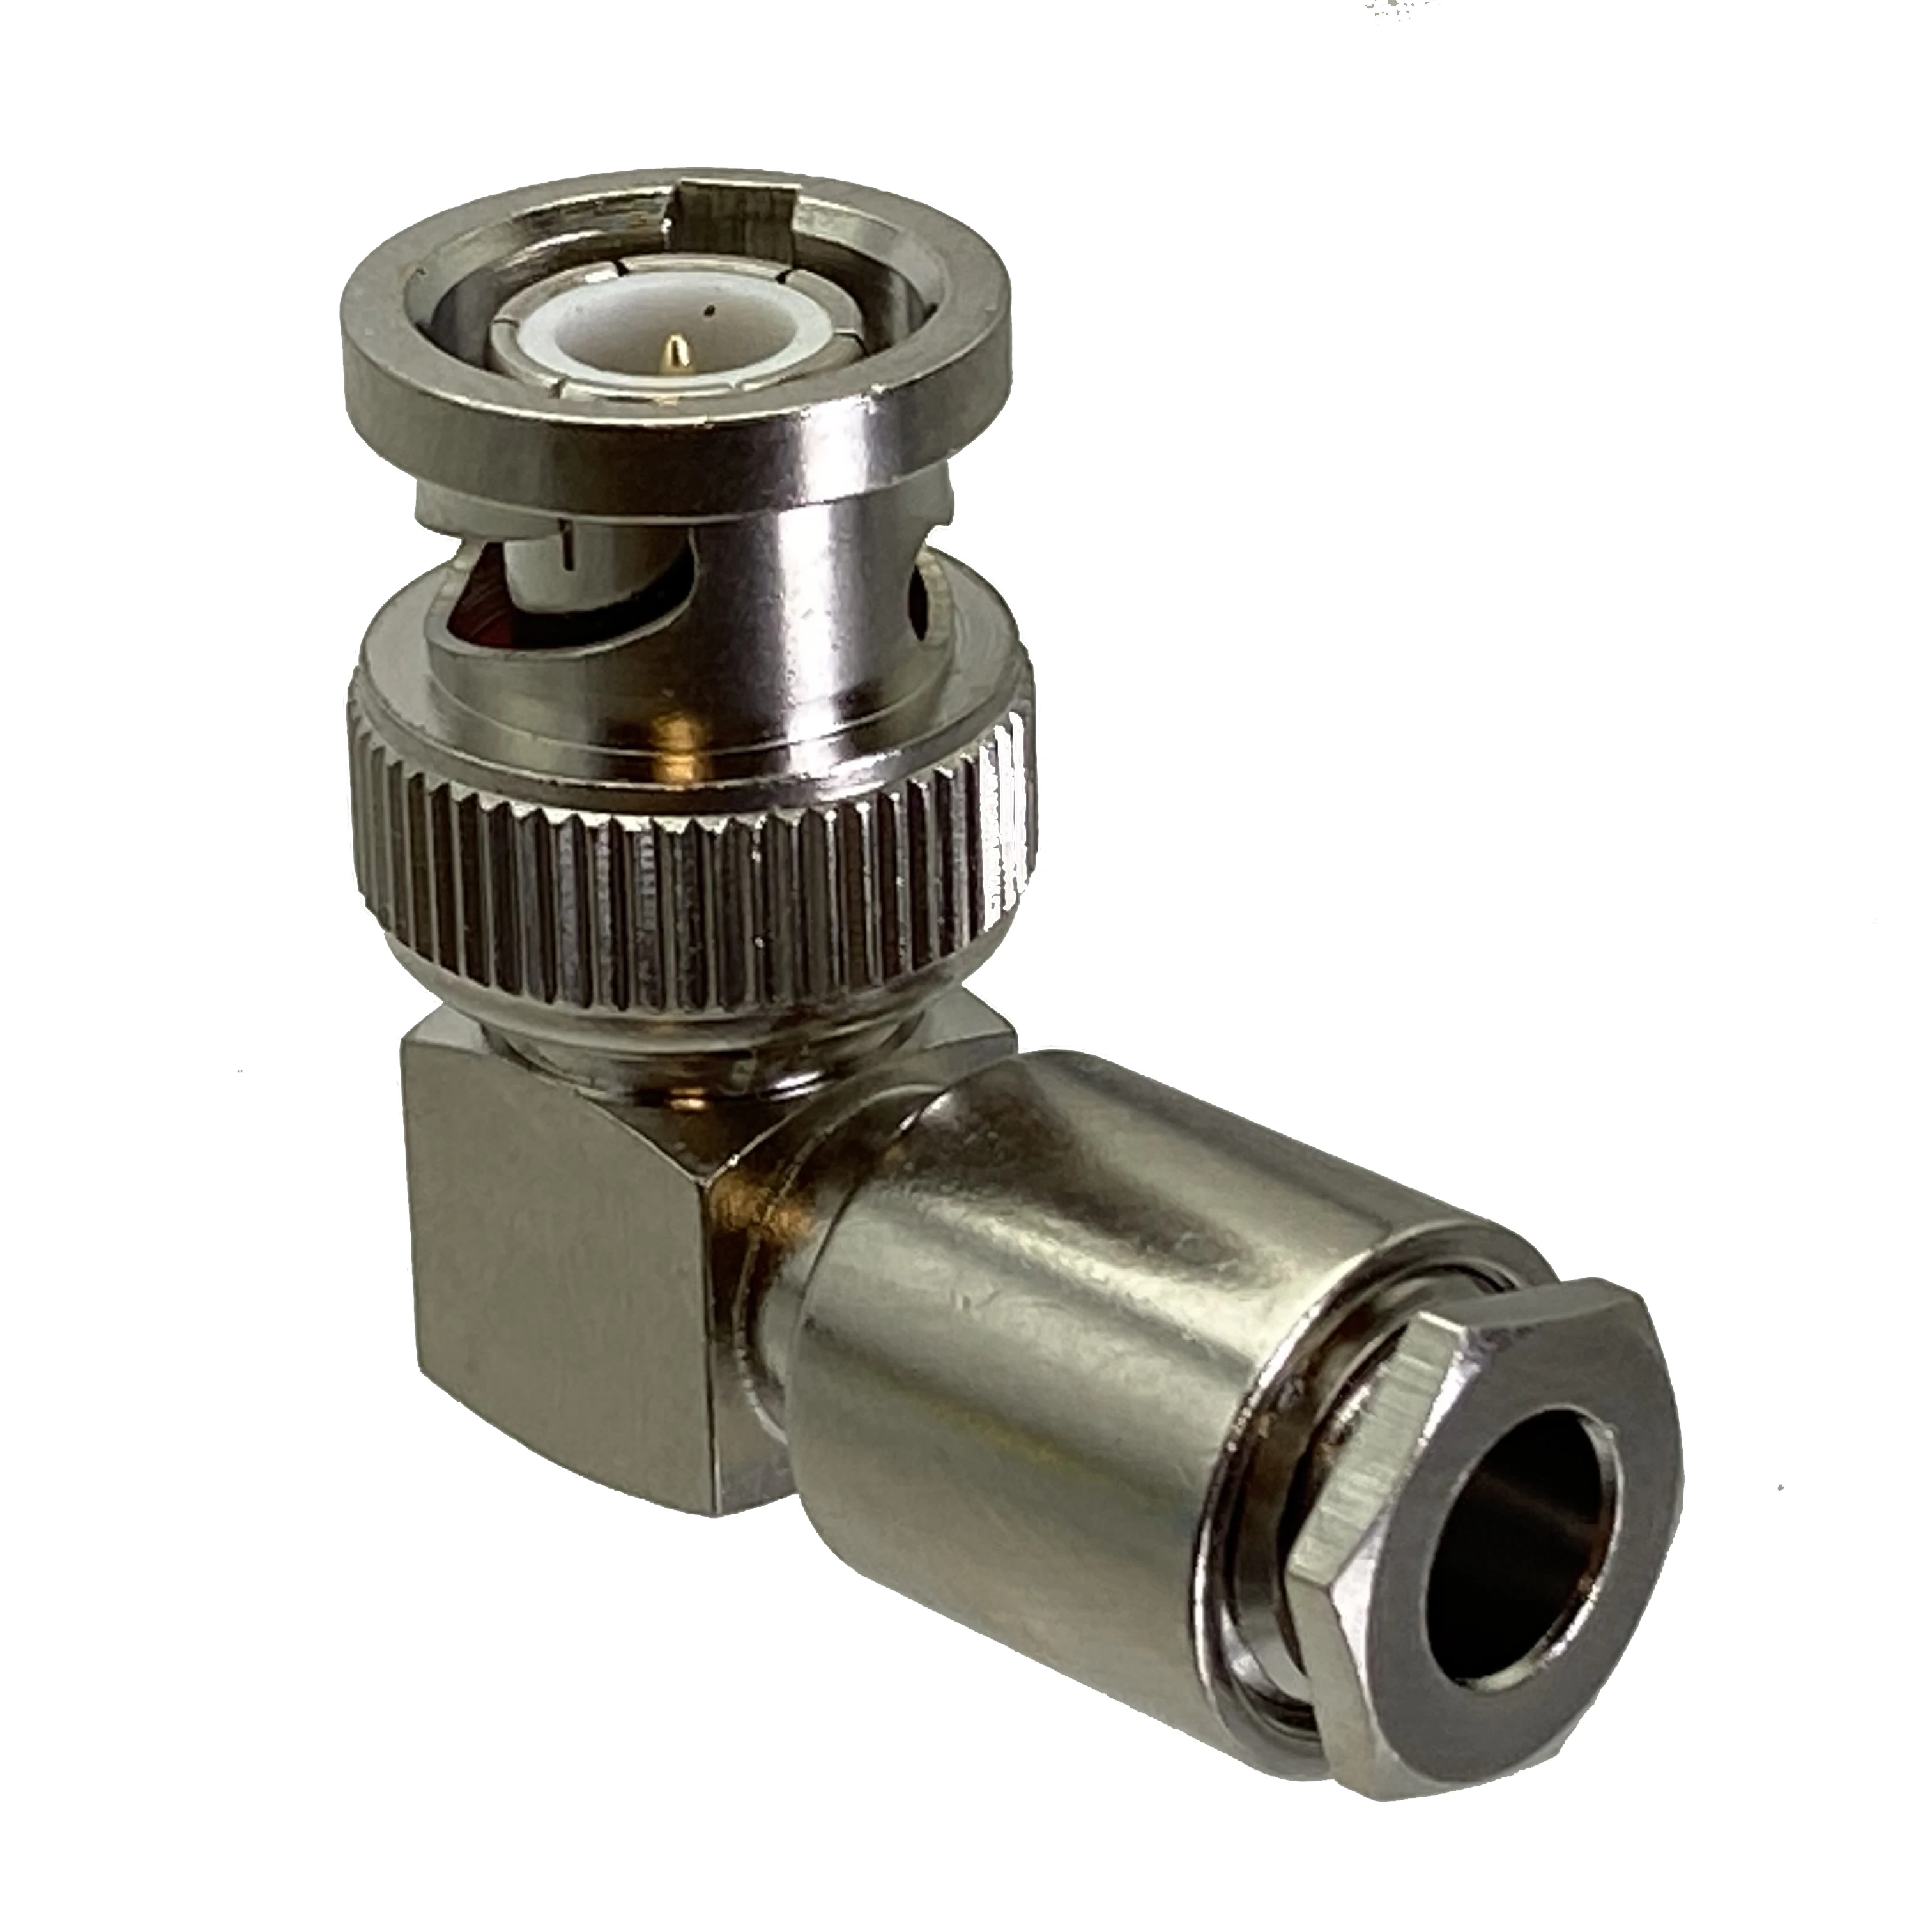 BNC male plug right angle clamp RG142 LMR195 RG58 RG400 Cable RF Coaxial connector Wire Terminals